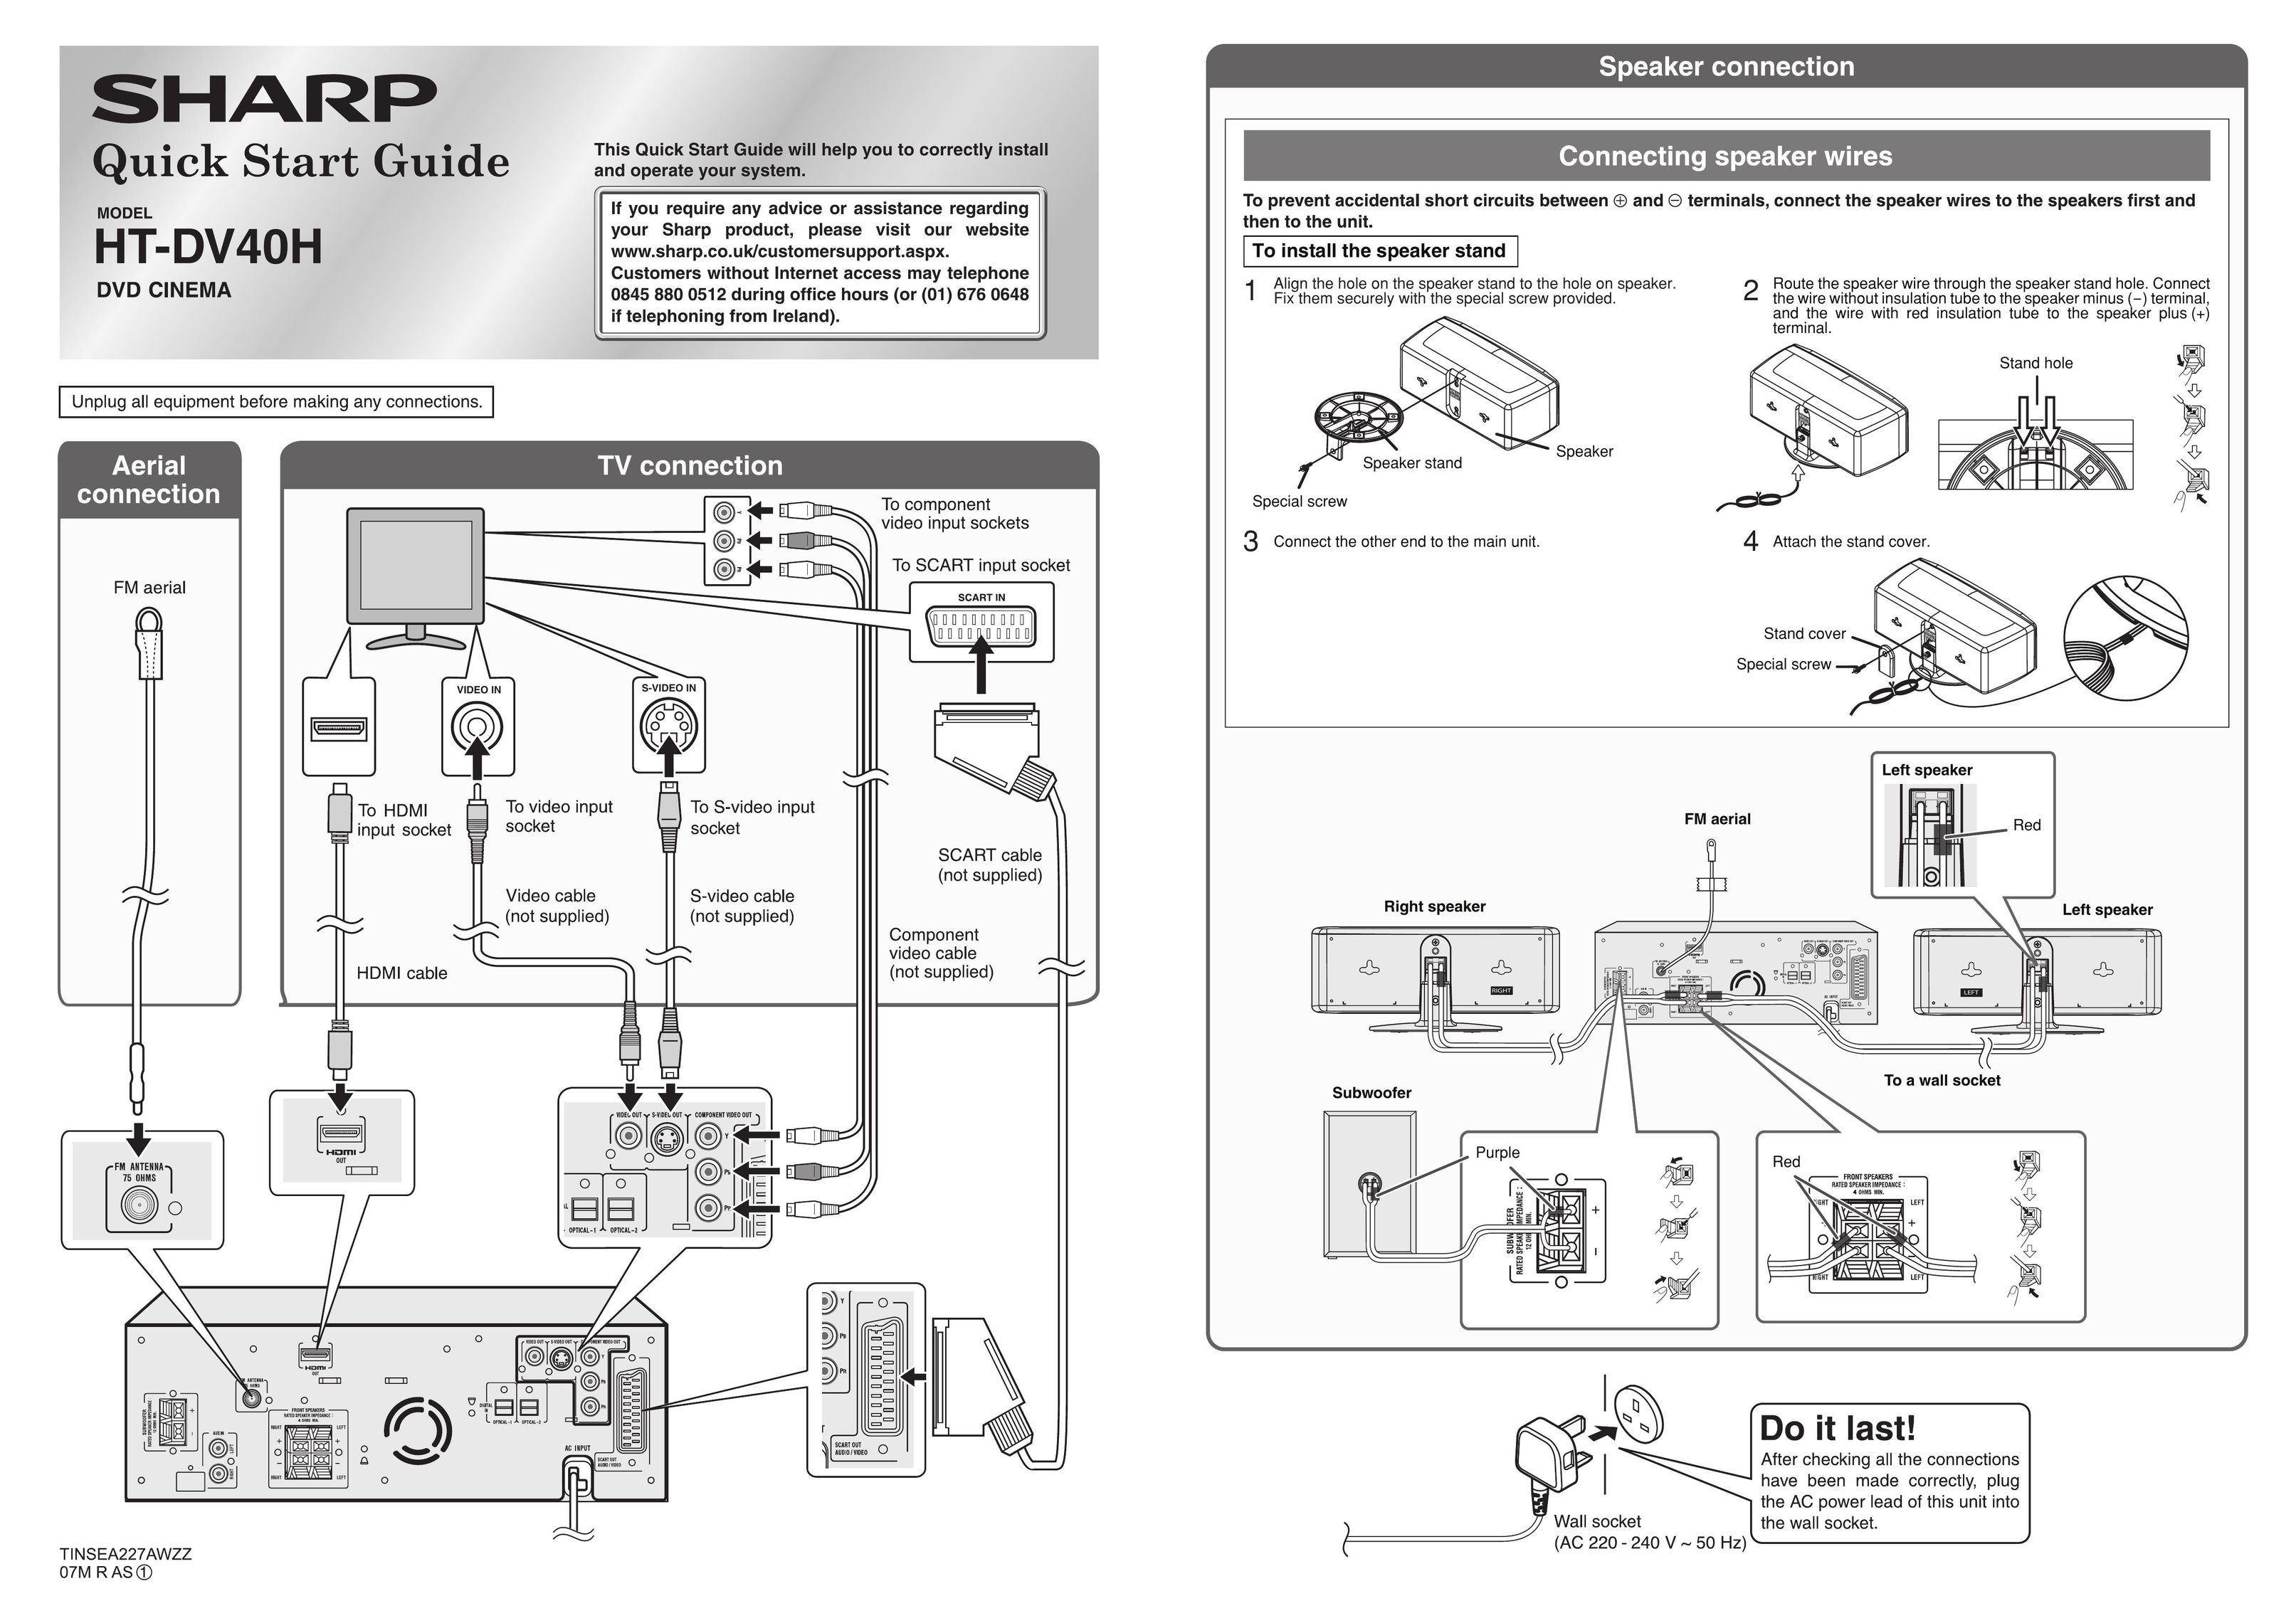 Sharp HT-DV40H Home Theater System User Manual